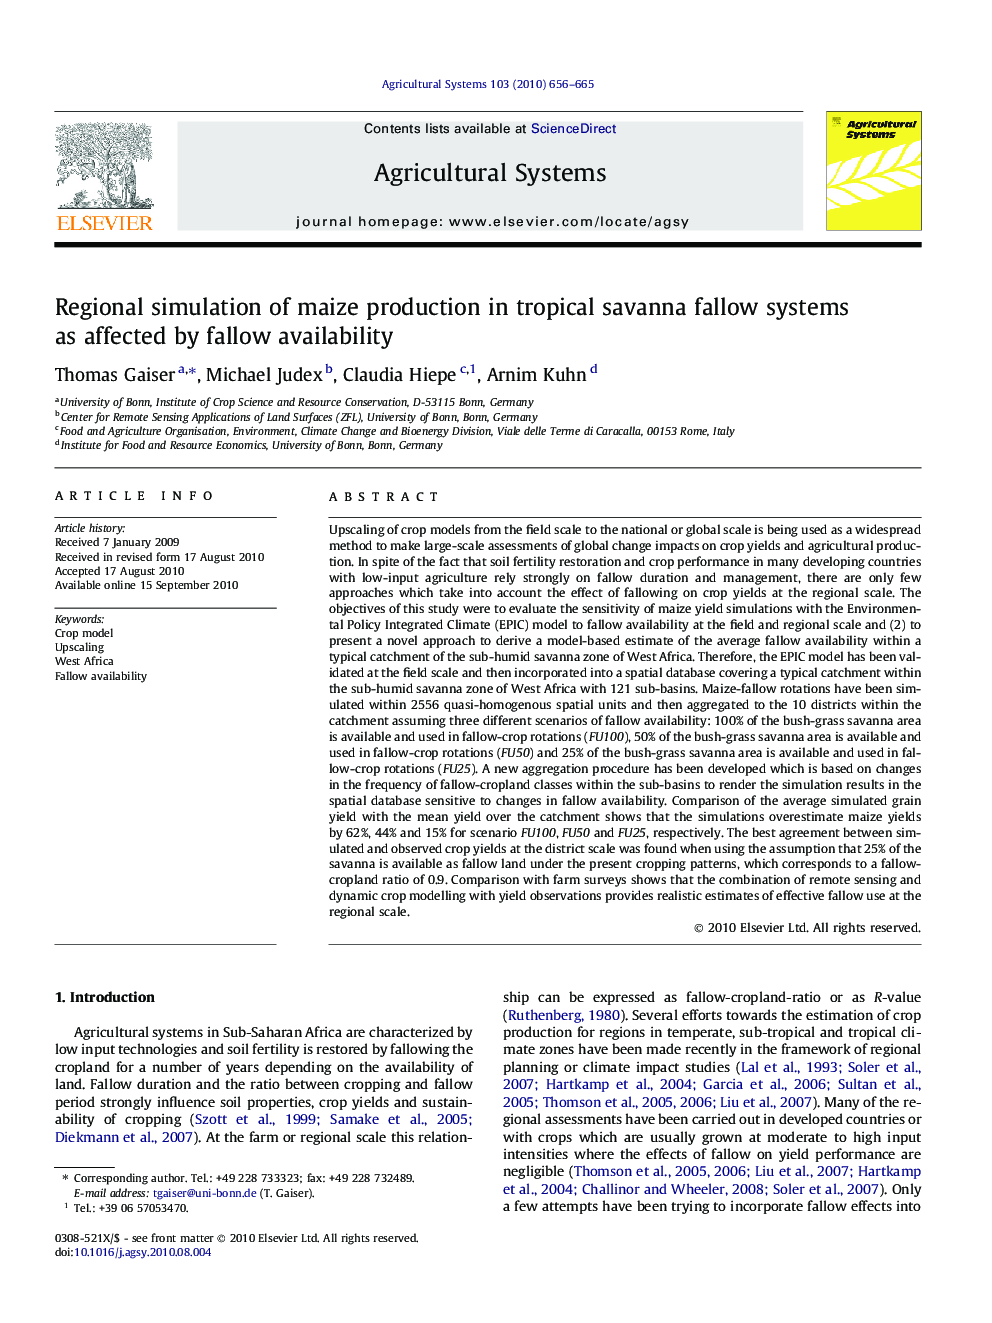 Regional simulation of maize production in tropical savanna fallow systems as affected by fallow availability